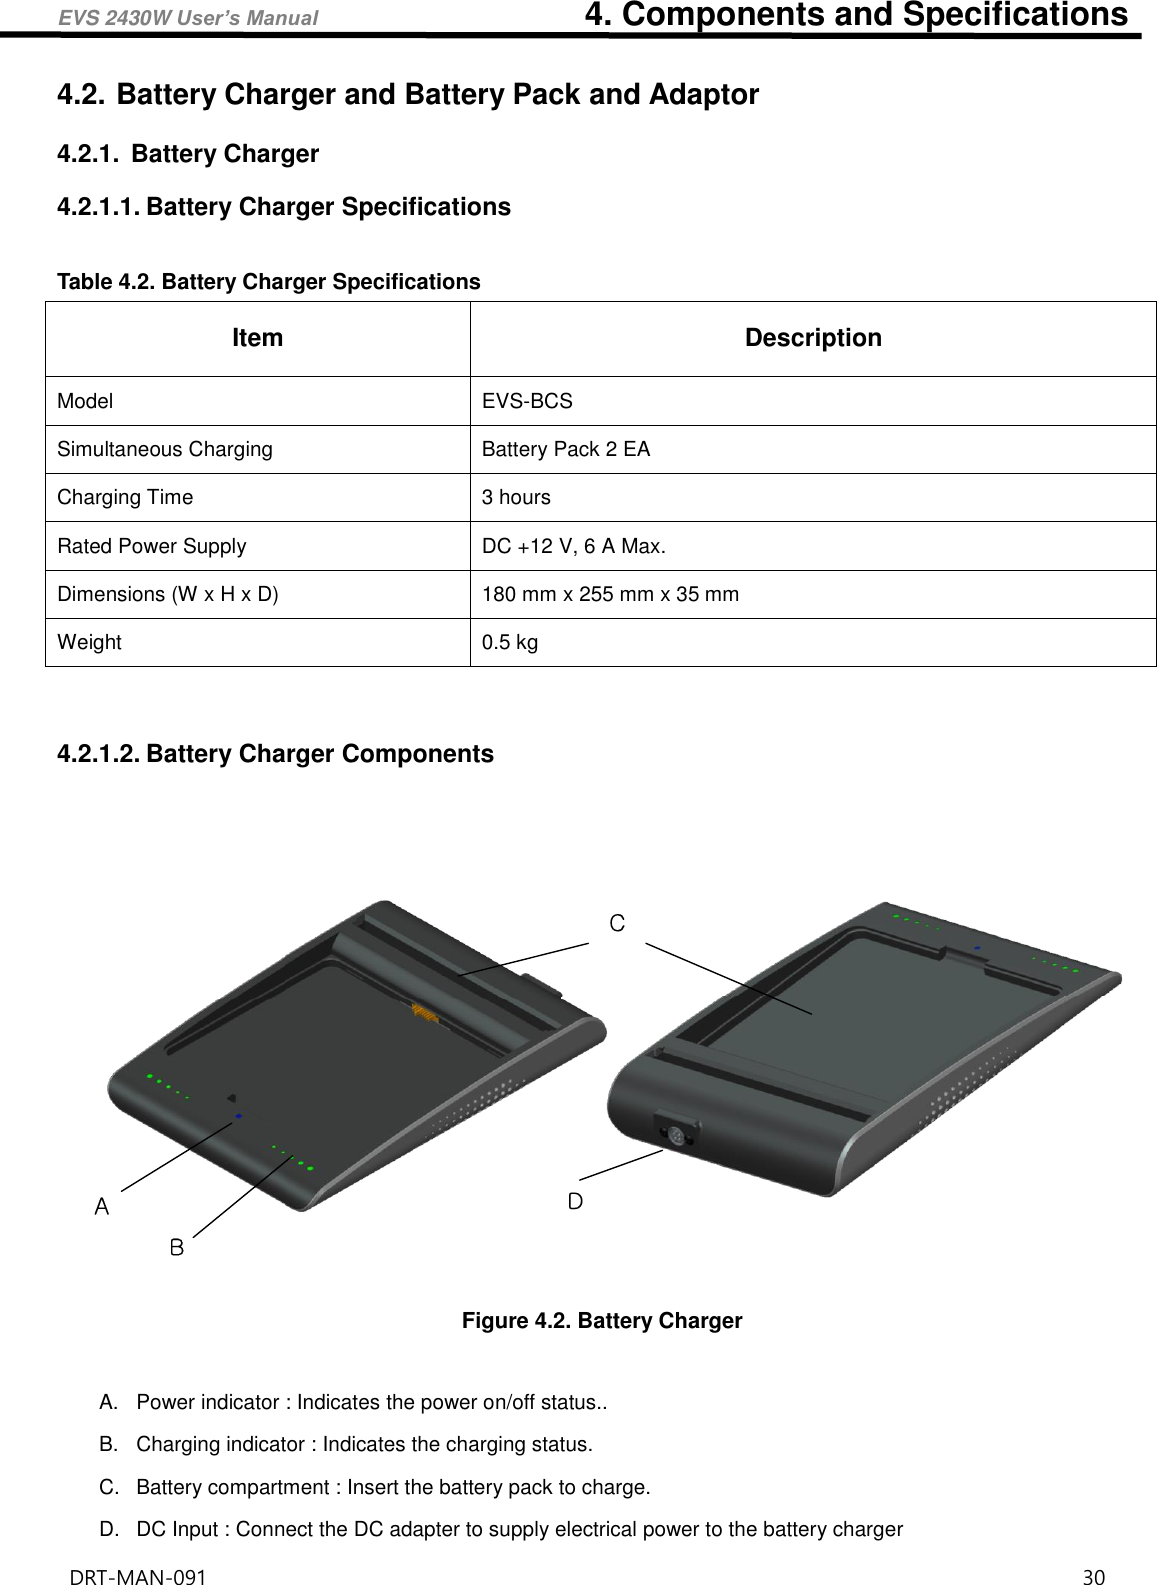 EVS 2430W User’s Manual                                4. Components and Specifications DRT-MAN-091                                                                                    30   4.2. Battery Charger and Battery Pack and Adaptor 4.2.1.  Battery Charger 4.2.1.1. Battery Charger Specifications  Table 4.2. Battery Charger Specifications Item Description Model EVS-BCS Simultaneous Charging   Battery Pack 2 EA   Charging Time   3 hours   Rated Power Supply DC +12 V, 6 A Max.   Dimensions (W x H x D) 180 mm x 255 mm x 35 mm Weight 0.5 kg    4.2.1.2. Battery Charger Components     ABDC Figure 4.2. Battery Charger  A.  Power indicator : Indicates the power on/off status.. B.  Charging indicator : Indicates the charging status.   C.  Battery compartment : Insert the battery pack to charge.   D.  DC Input : Connect the DC adapter to supply electrical power to the battery charger   